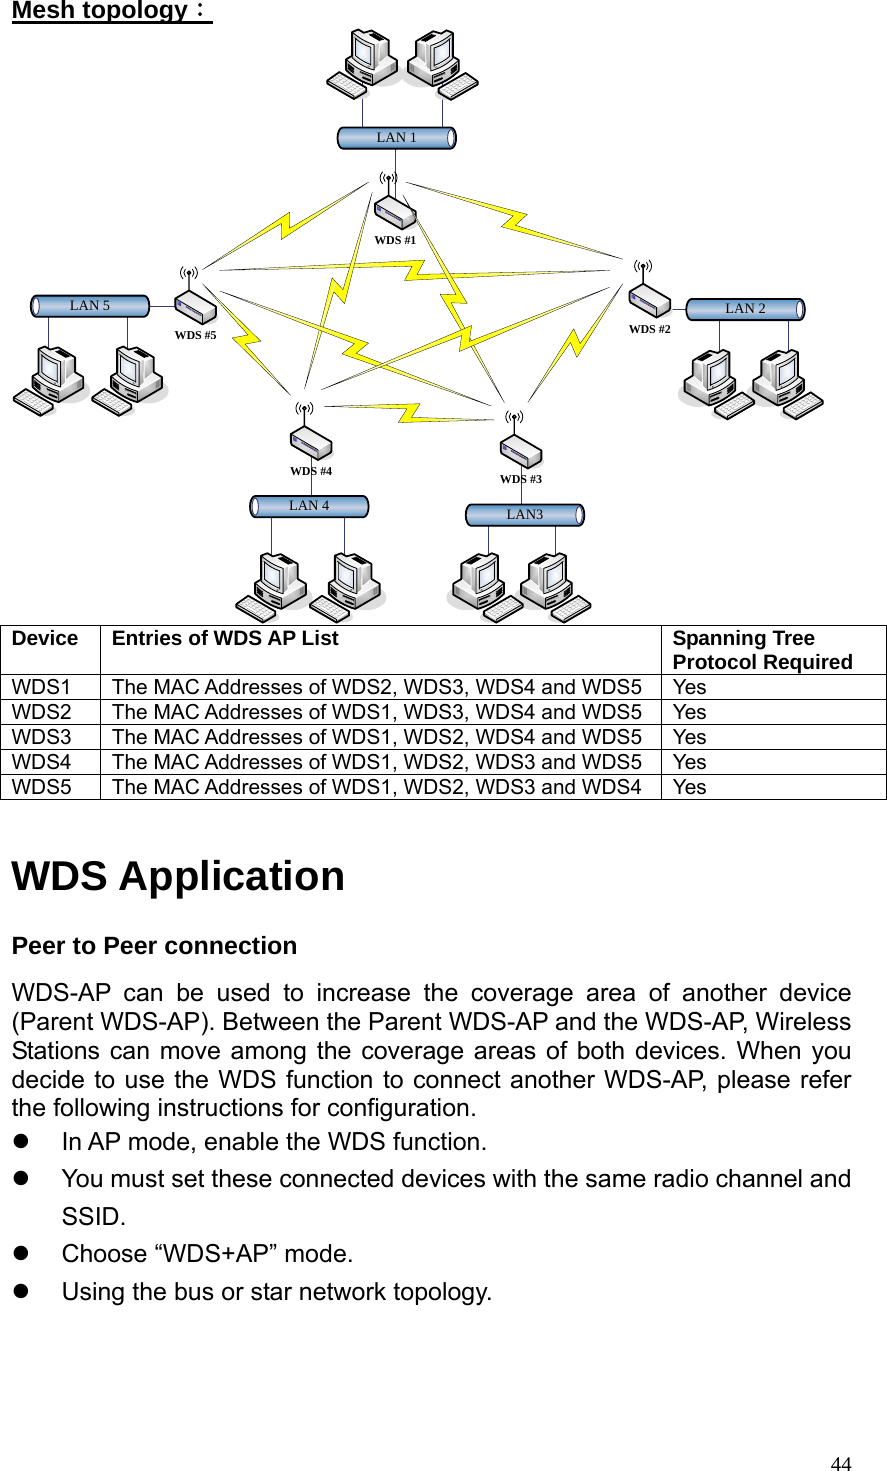  44Mesh topology： LAN3LAN 4LAN 1LAN 2LAN 5WDS #5 WDS #2WDS #3WDS #4WDS #1 Device  Entries of WDS AP List  Spanning Tree Protocol Required WDS1  The MAC Addresses of WDS2, WDS3, WDS4 and WDS5  Yes WDS2  The MAC Addresses of WDS1, WDS3, WDS4 and WDS5  Yes WDS3  The MAC Addresses of WDS1, WDS2, WDS4 and WDS5  Yes WDS4  The MAC Addresses of WDS1, WDS2, WDS3 and WDS5  Yes WDS5  The MAC Addresses of WDS1, WDS2, WDS3 and WDS4  Yes  WDS Application Peer to Peer connection WDS-AP can be used to increase the coverage area of another device (Parent WDS-AP). Between the Parent WDS-AP and the WDS-AP, Wireless Stations can move among the coverage areas of both devices. When you decide to use the WDS function to connect another WDS-AP, please refer the following instructions for configuration. z  In AP mode, enable the WDS function. z  You must set these connected devices with the same radio channel and SSID. z  Choose “WDS+AP” mode. z  Using the bus or star network topology. 